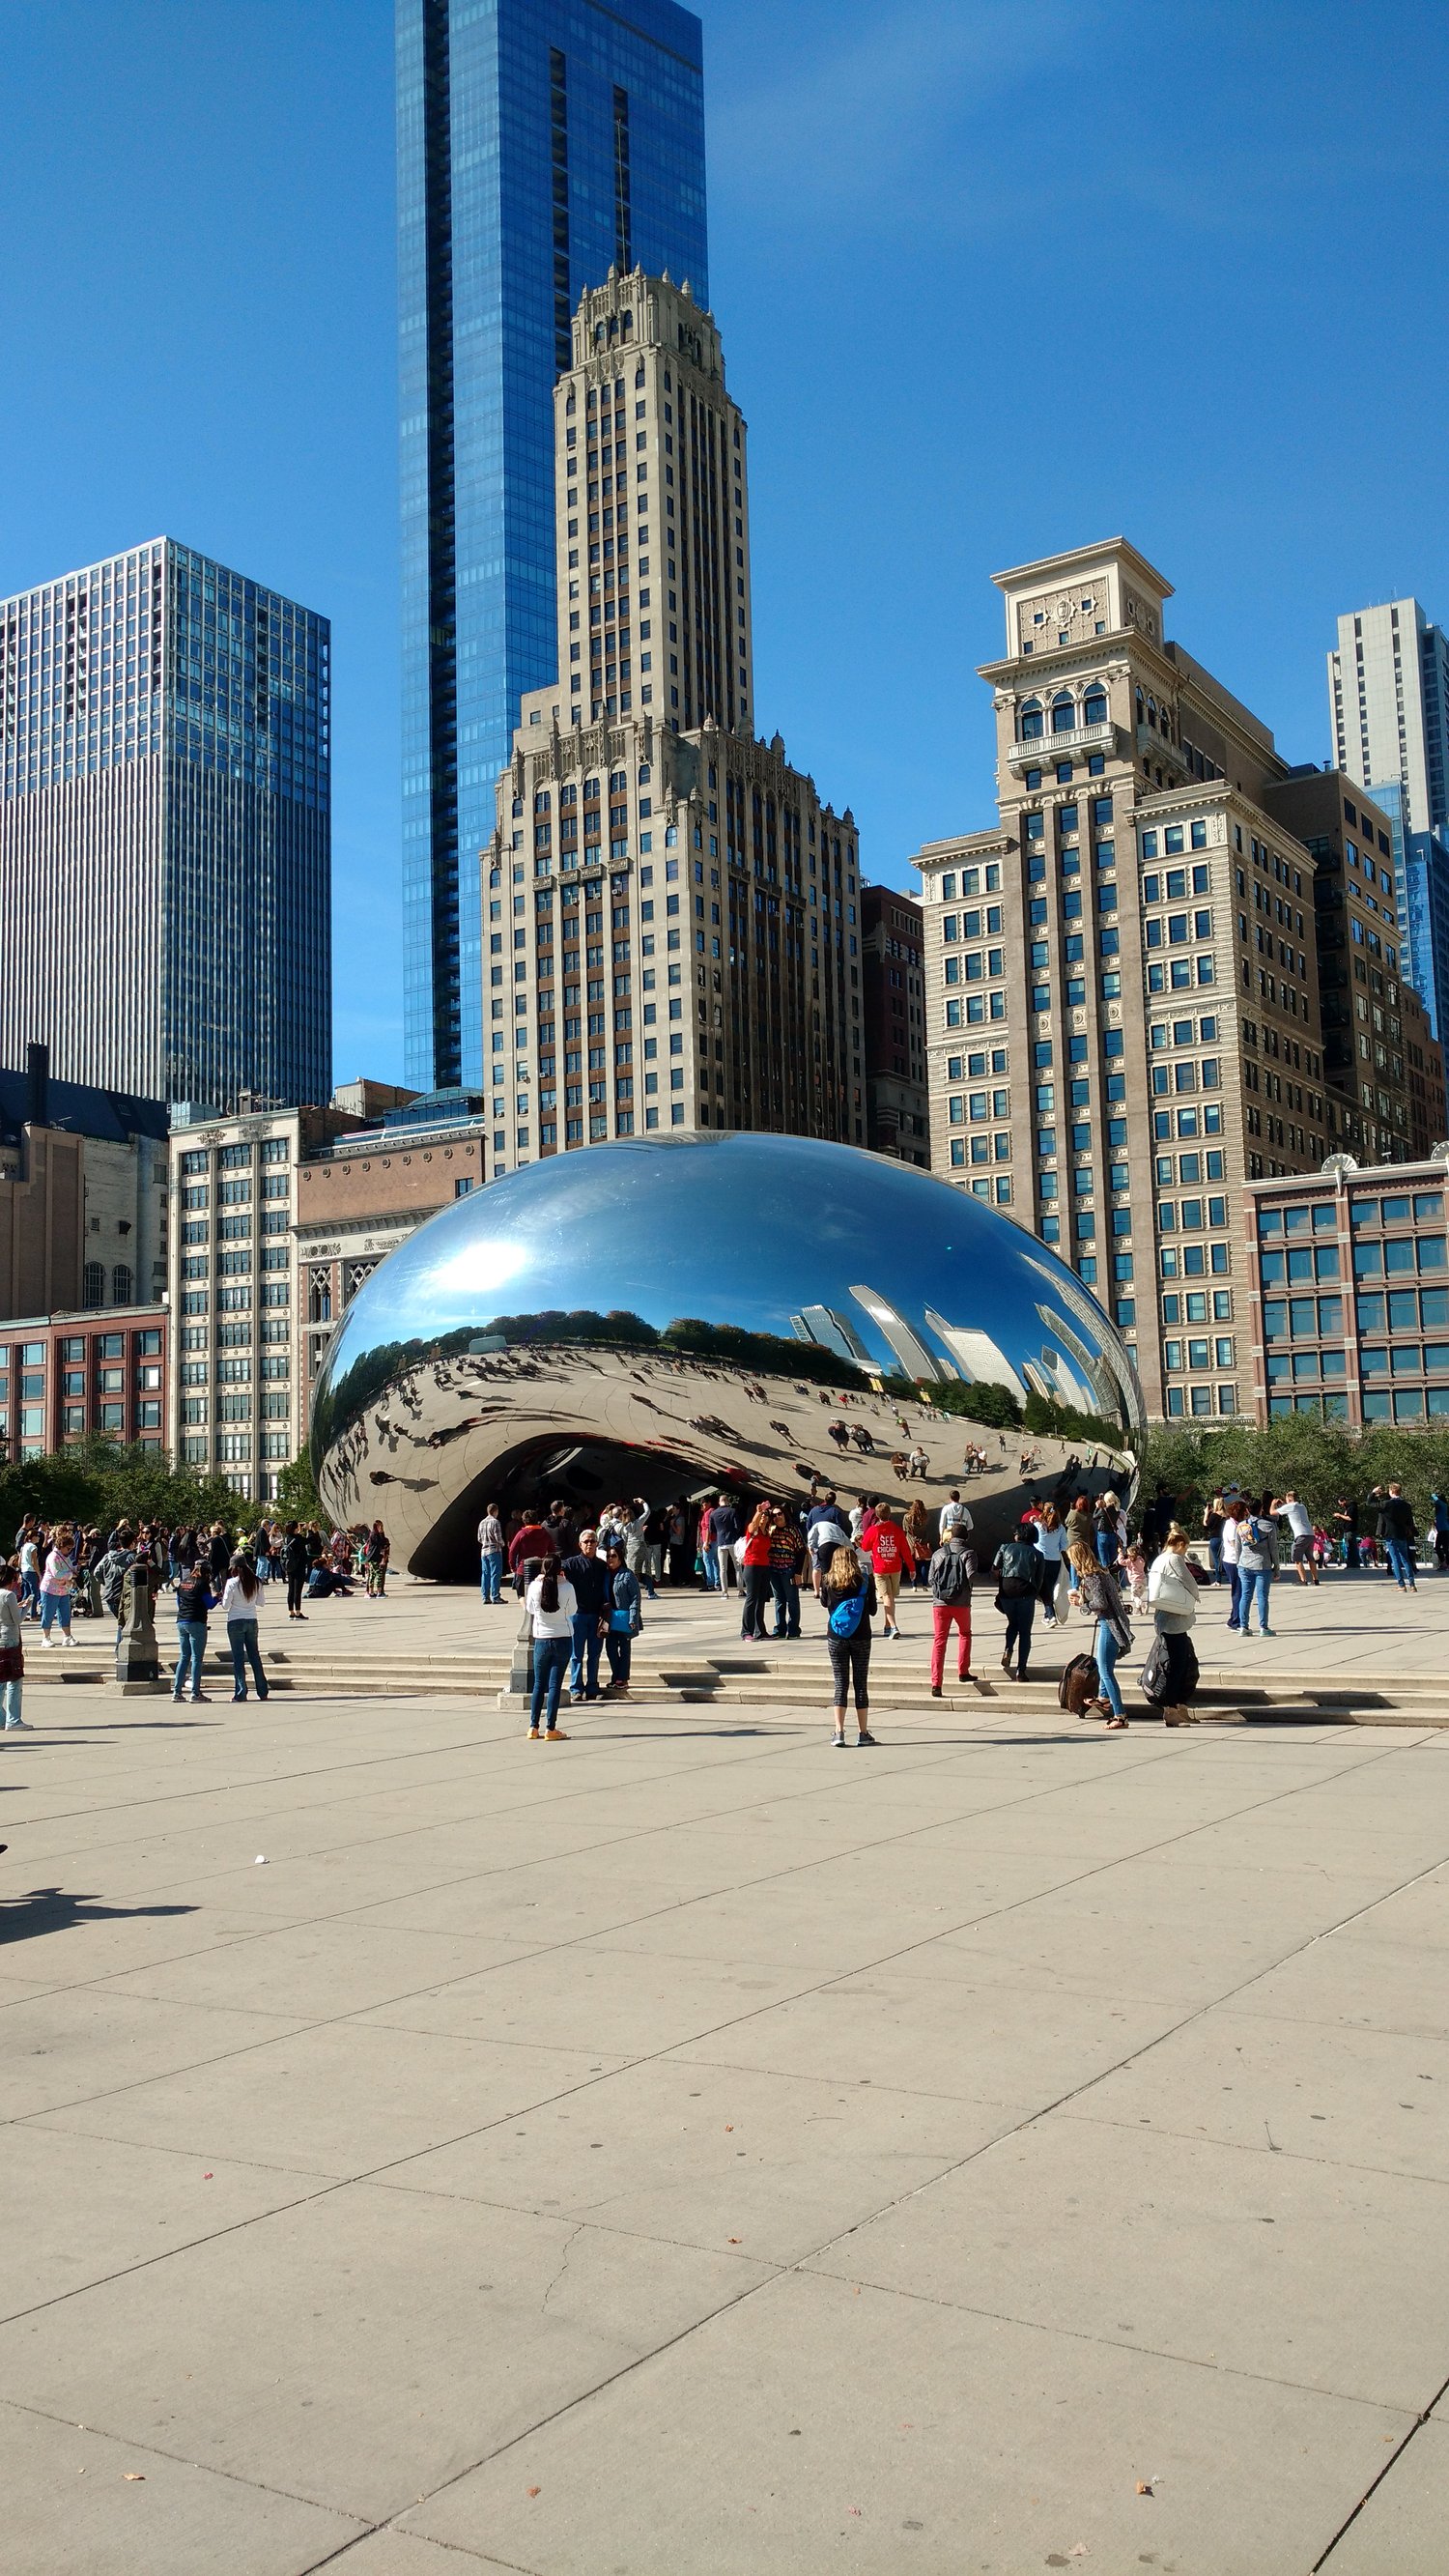 Anish Kapoor "Cloud Gate" sculpture at Chicago